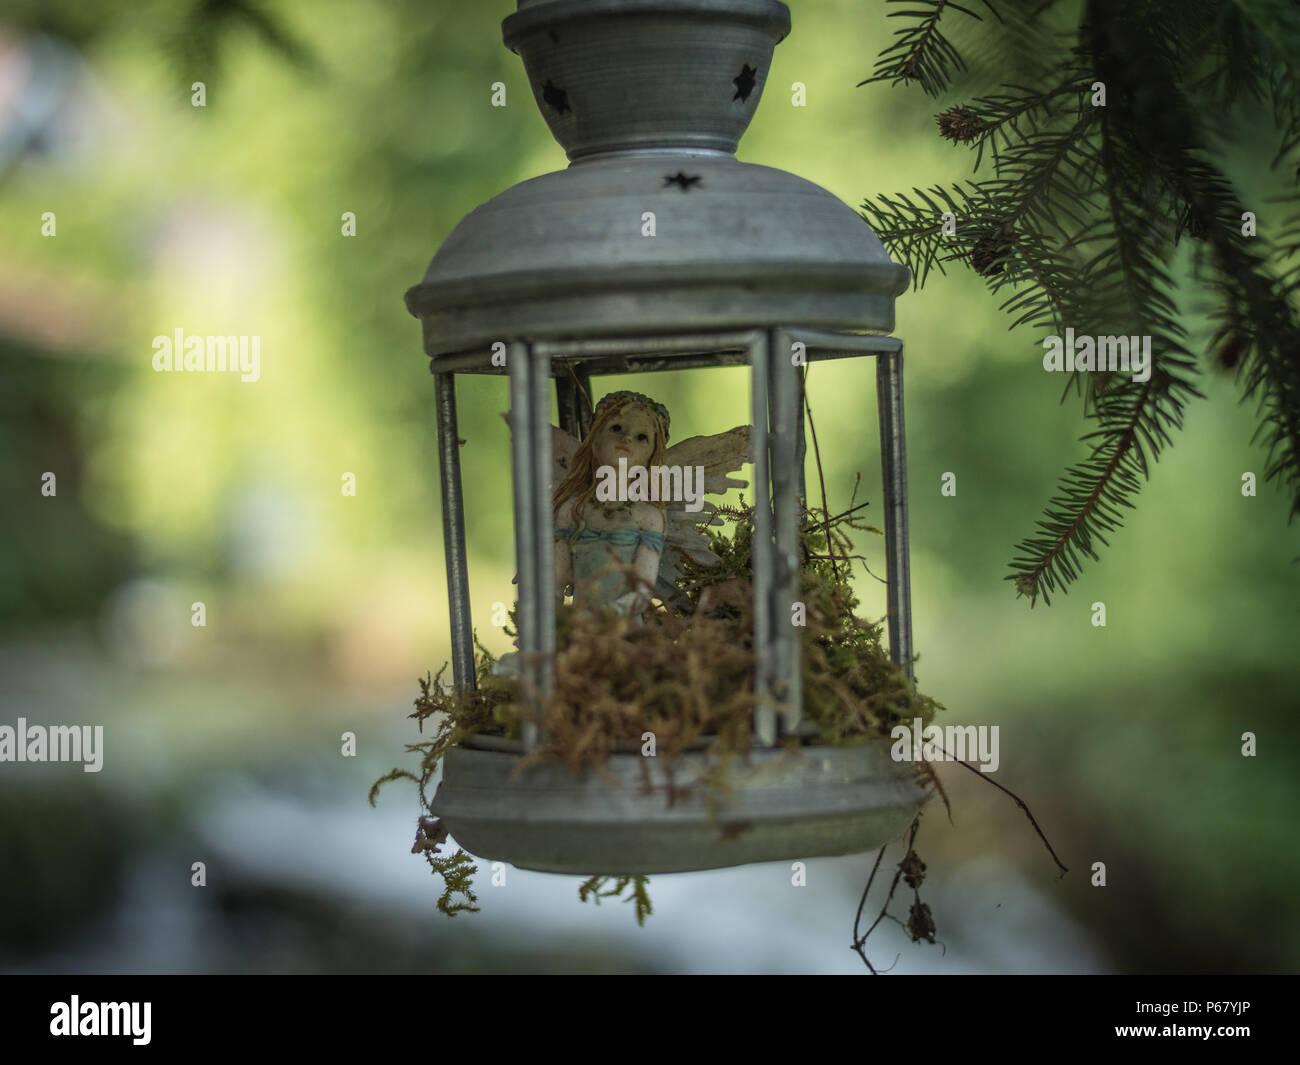 Closeup of a fairy figure sitting in a lantern that's hanging from a tree in a garden. Stock Photo